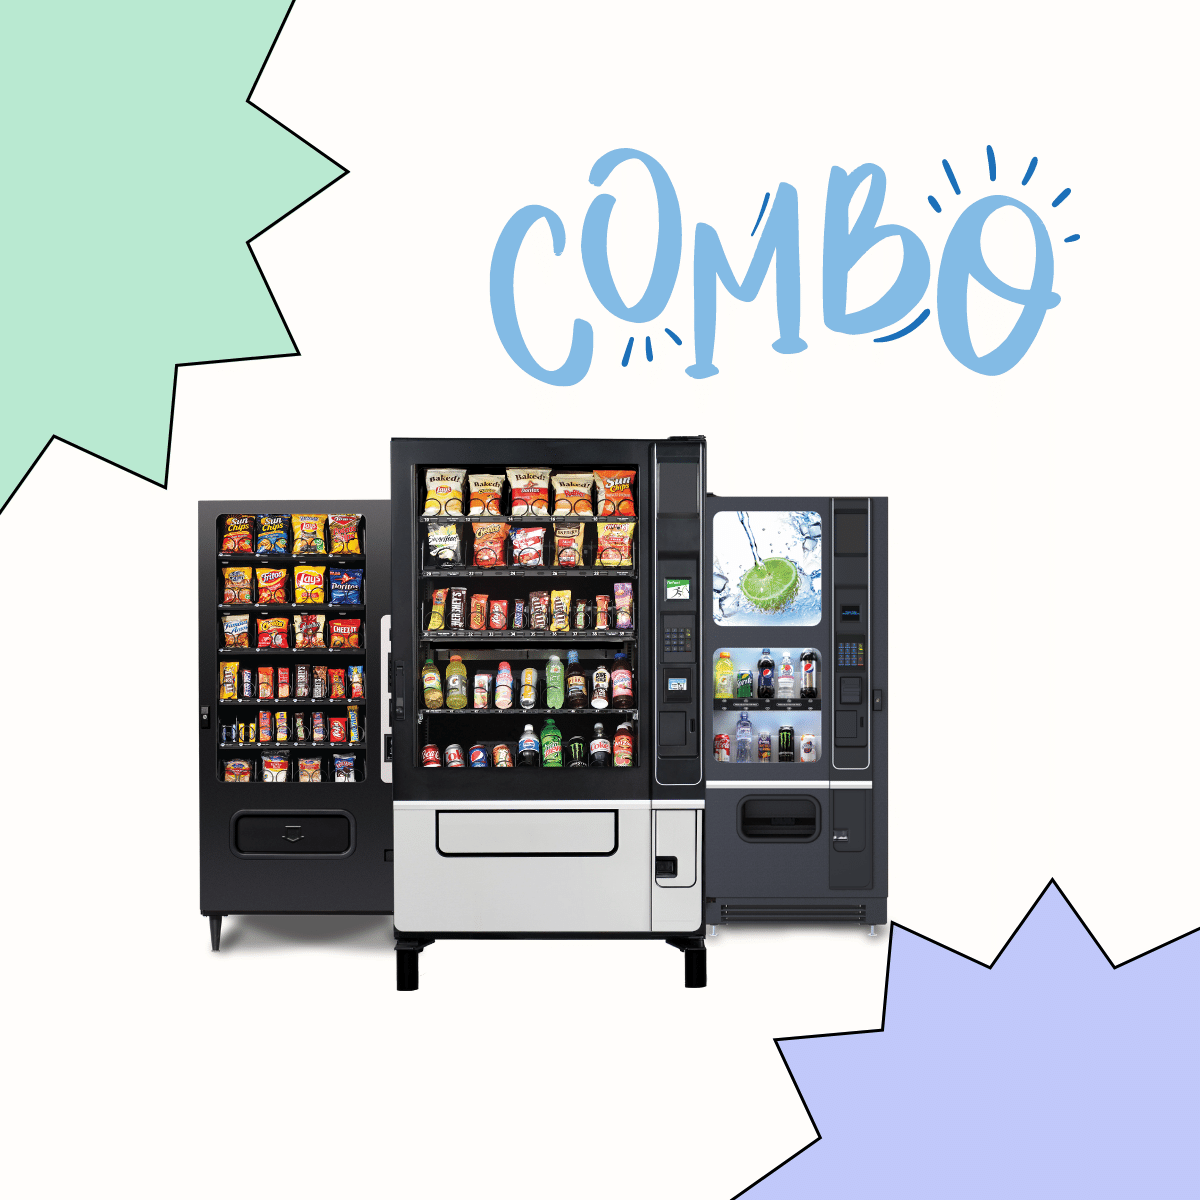 FULL SUPPORT FOR YOUR COMBO VENDING MACHINE